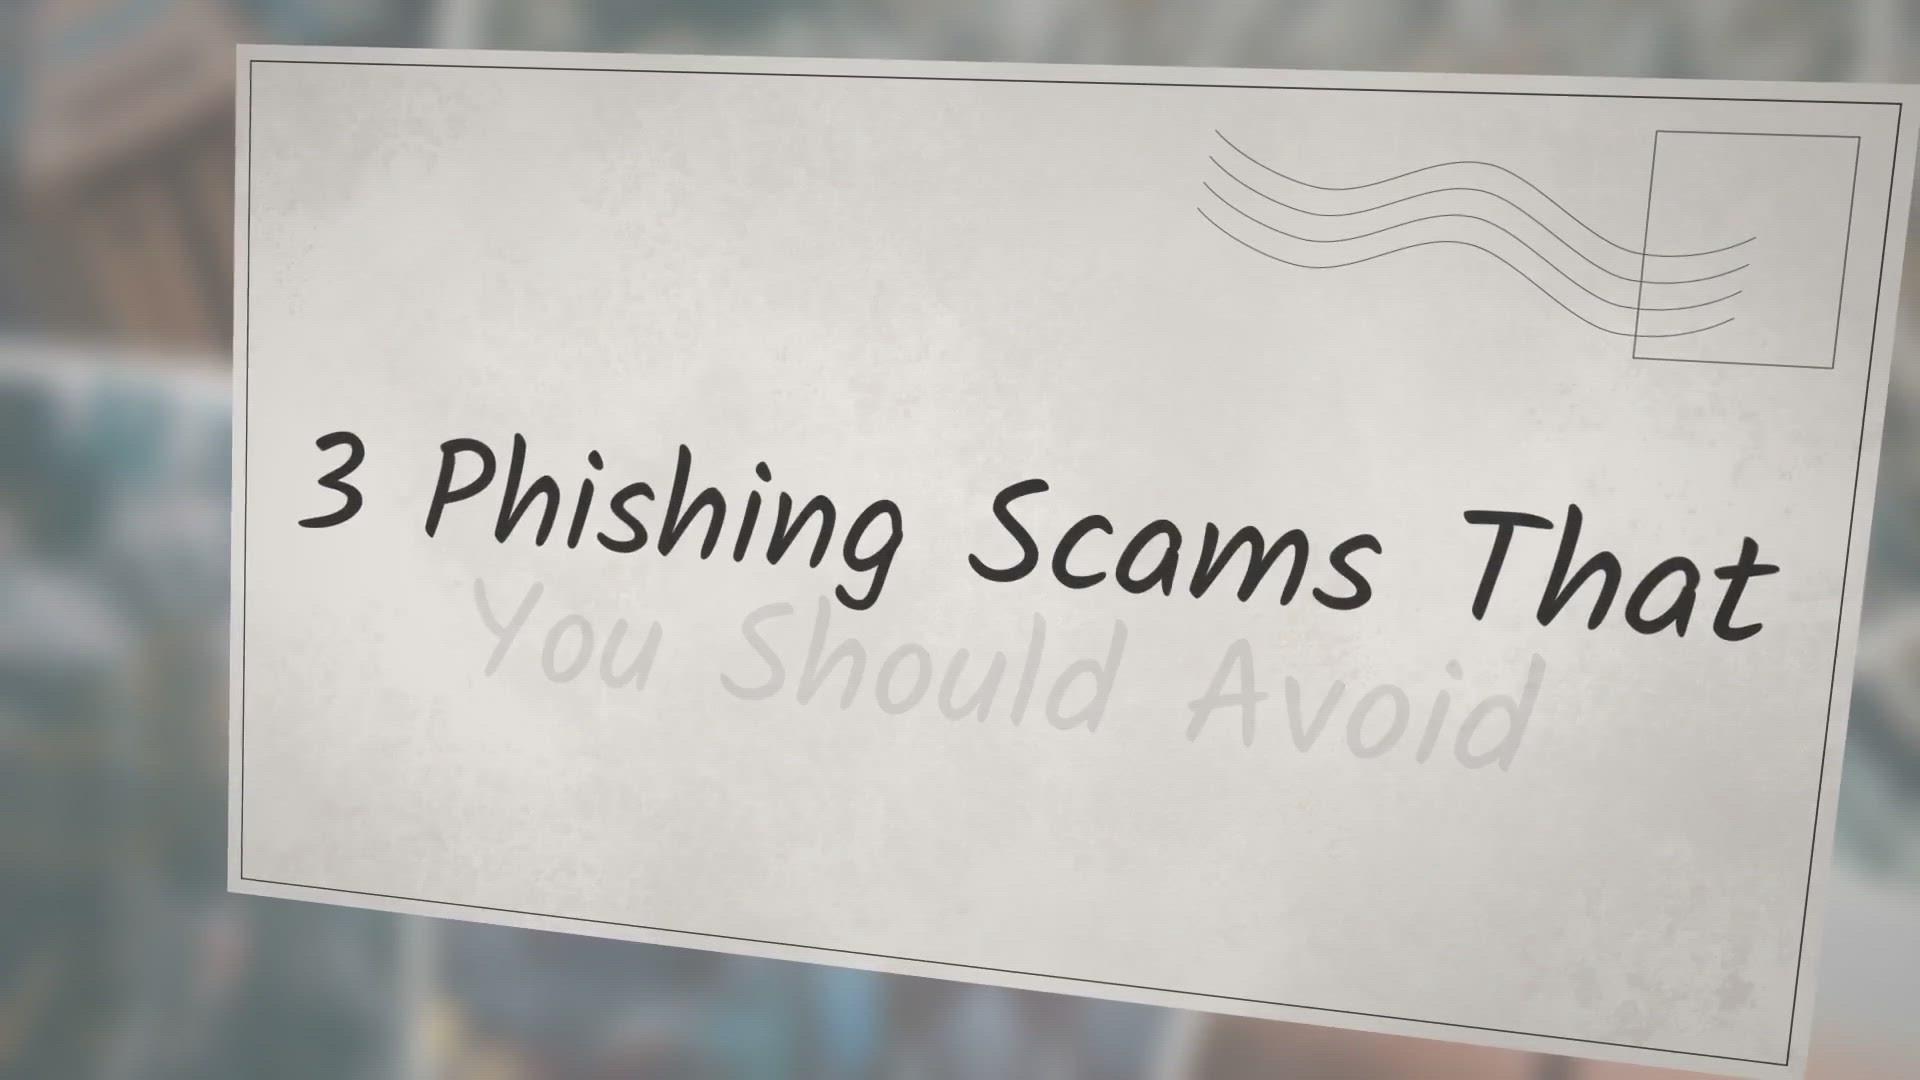 'Video thumbnail for 3 Phishing Scams That You Should Avoid'